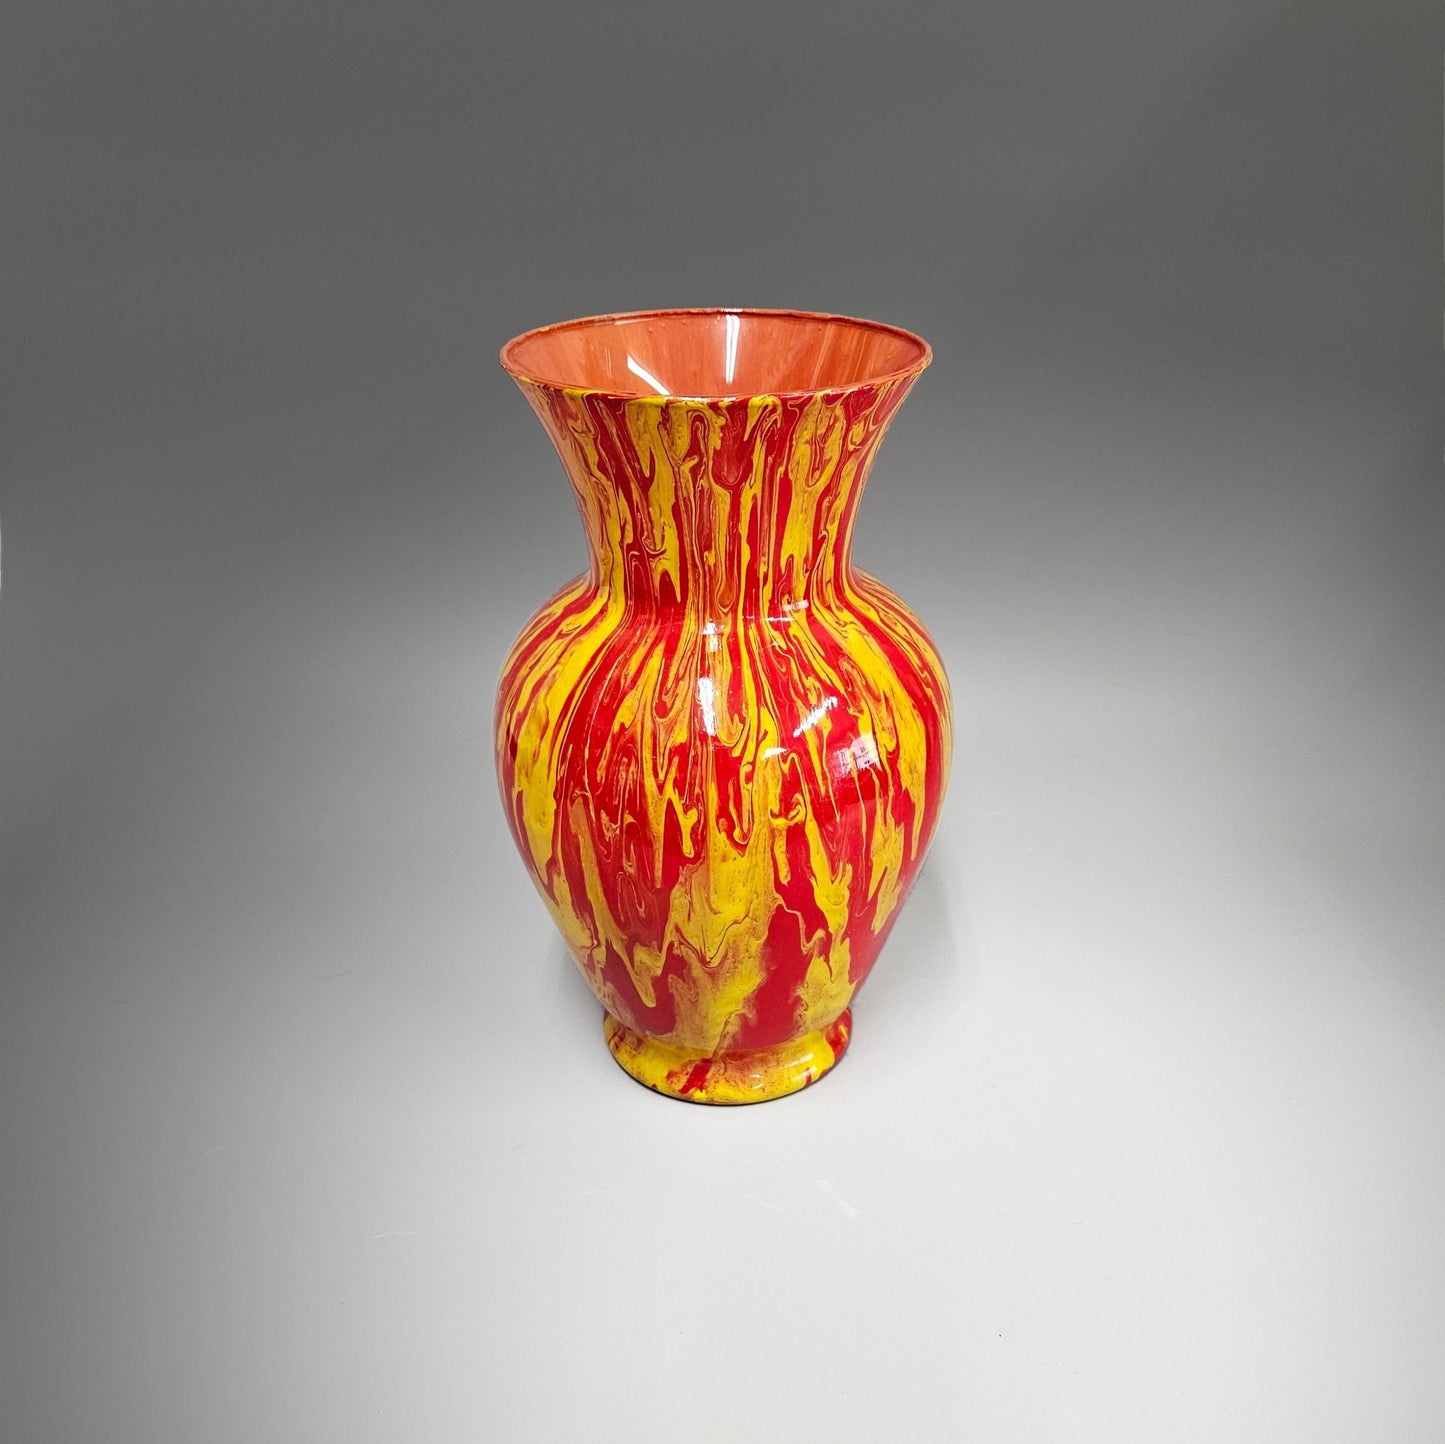 Glass Art Painted Vase in Red Orange Yellow | 10.75 Inch Tall Fluid Art Flower Vase | Modern Home Décor | Unique Acrylic Pour Gift Ideas